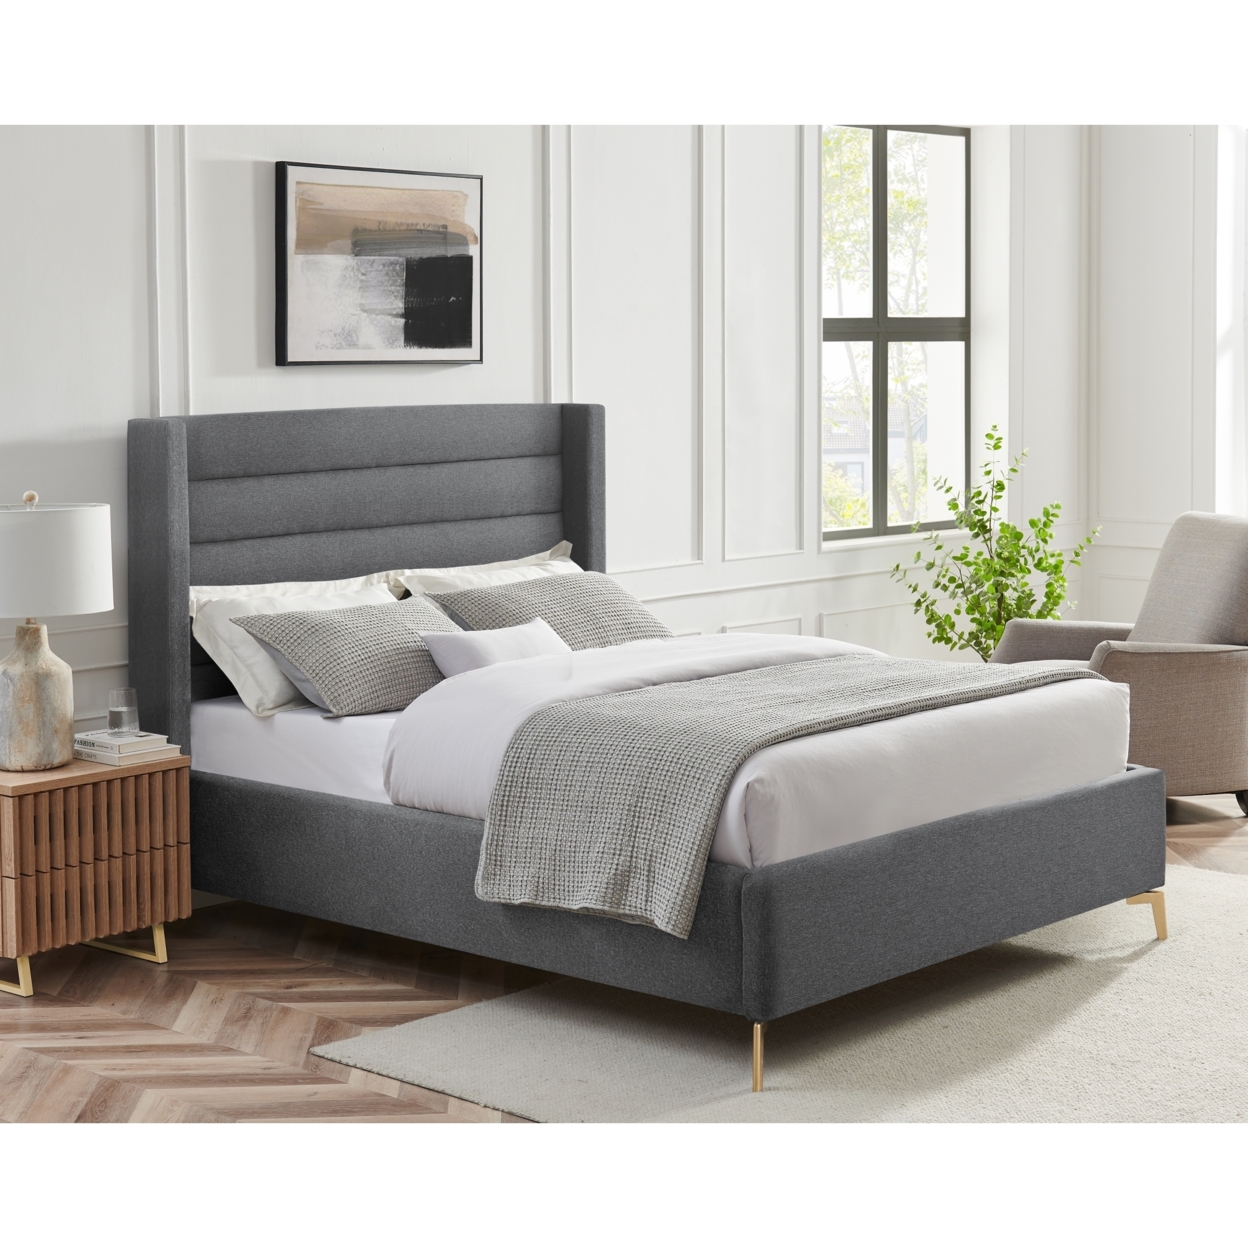 Rayce Bed - Linen Upholstered, Wingback Channel Tufted Headboard, Oblique Legs, Slats Included - Grey, Twin Xl